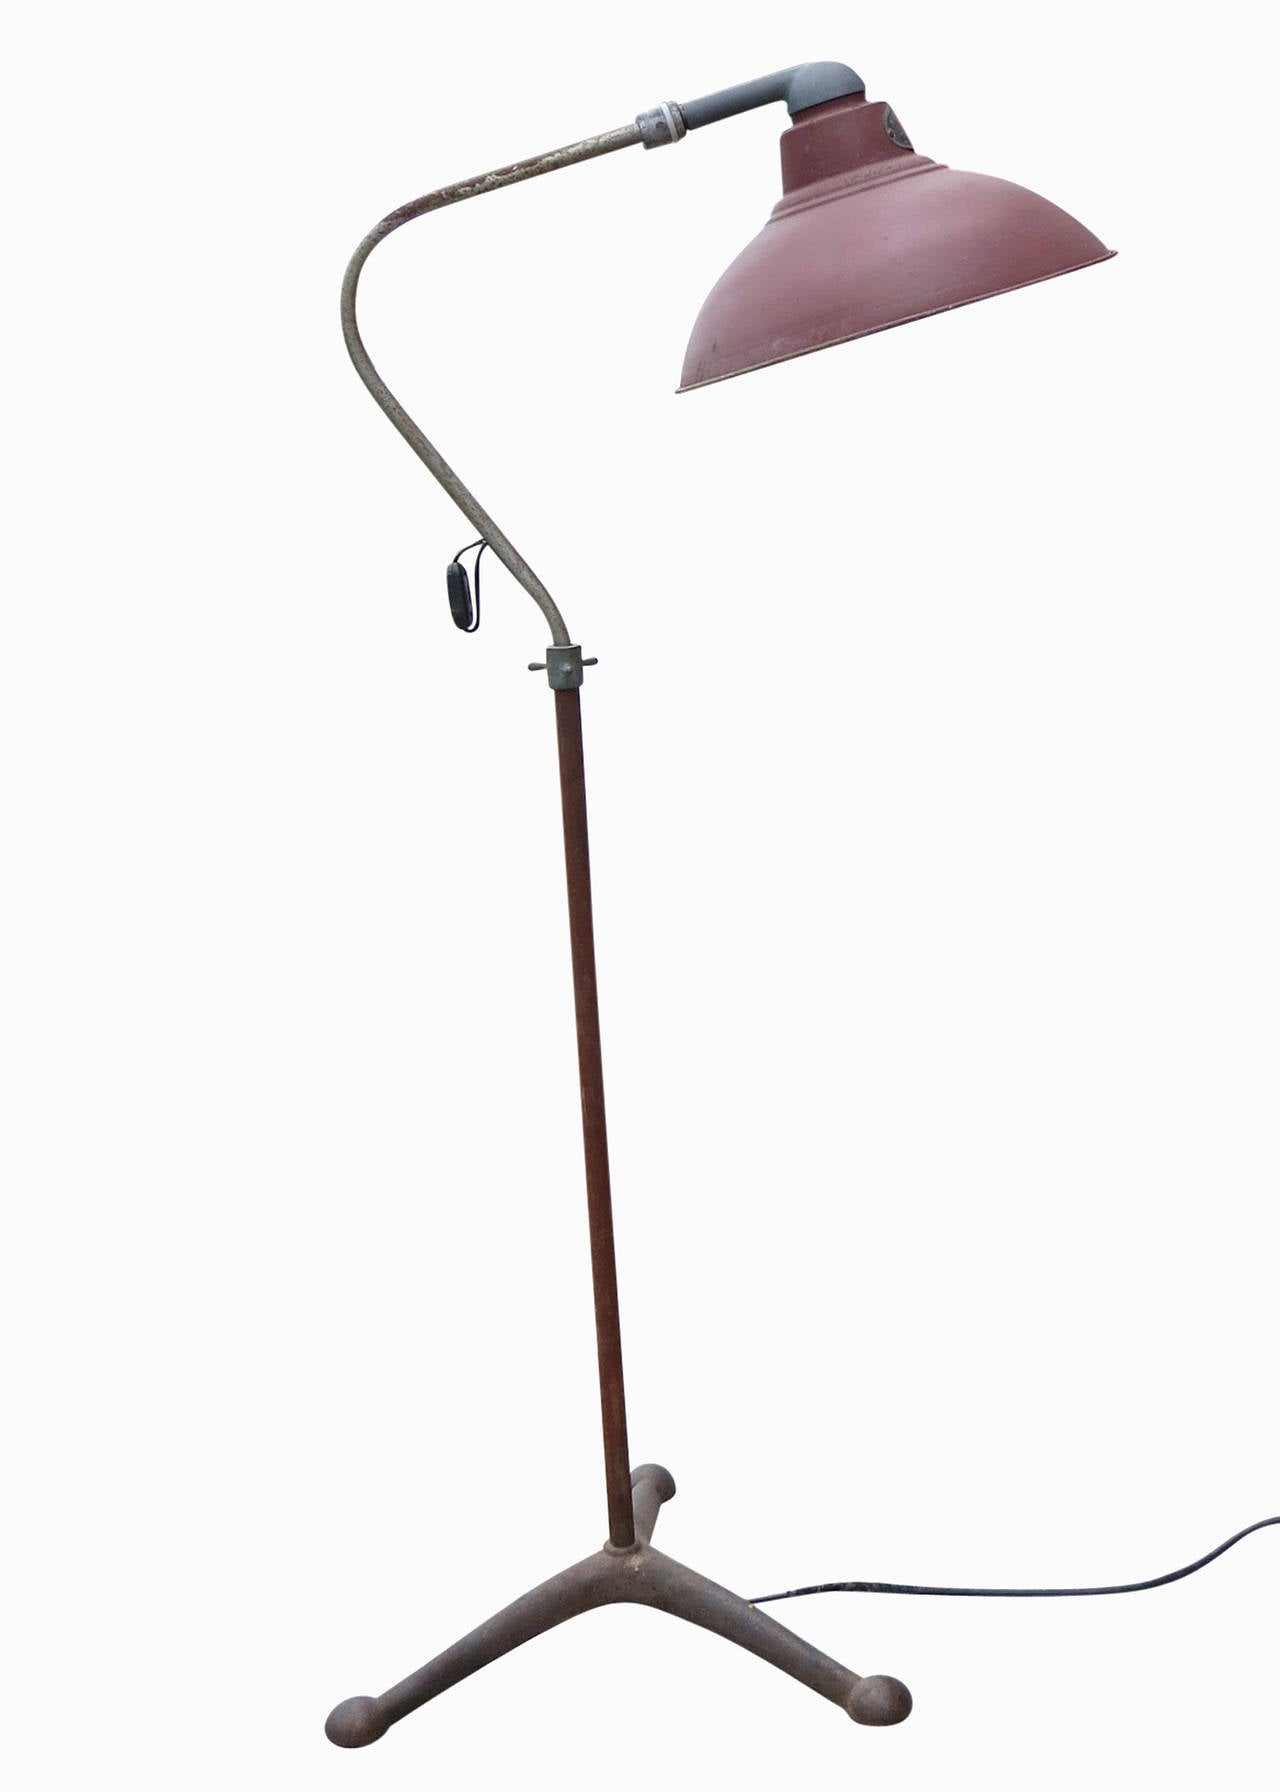 This desert air maker Industrial lamp features a heat tanning light which has been converted into a reading lamp. The lamp is an all metal construction with a unique machine age Industrial style and build. 

The head has an adjustable height of